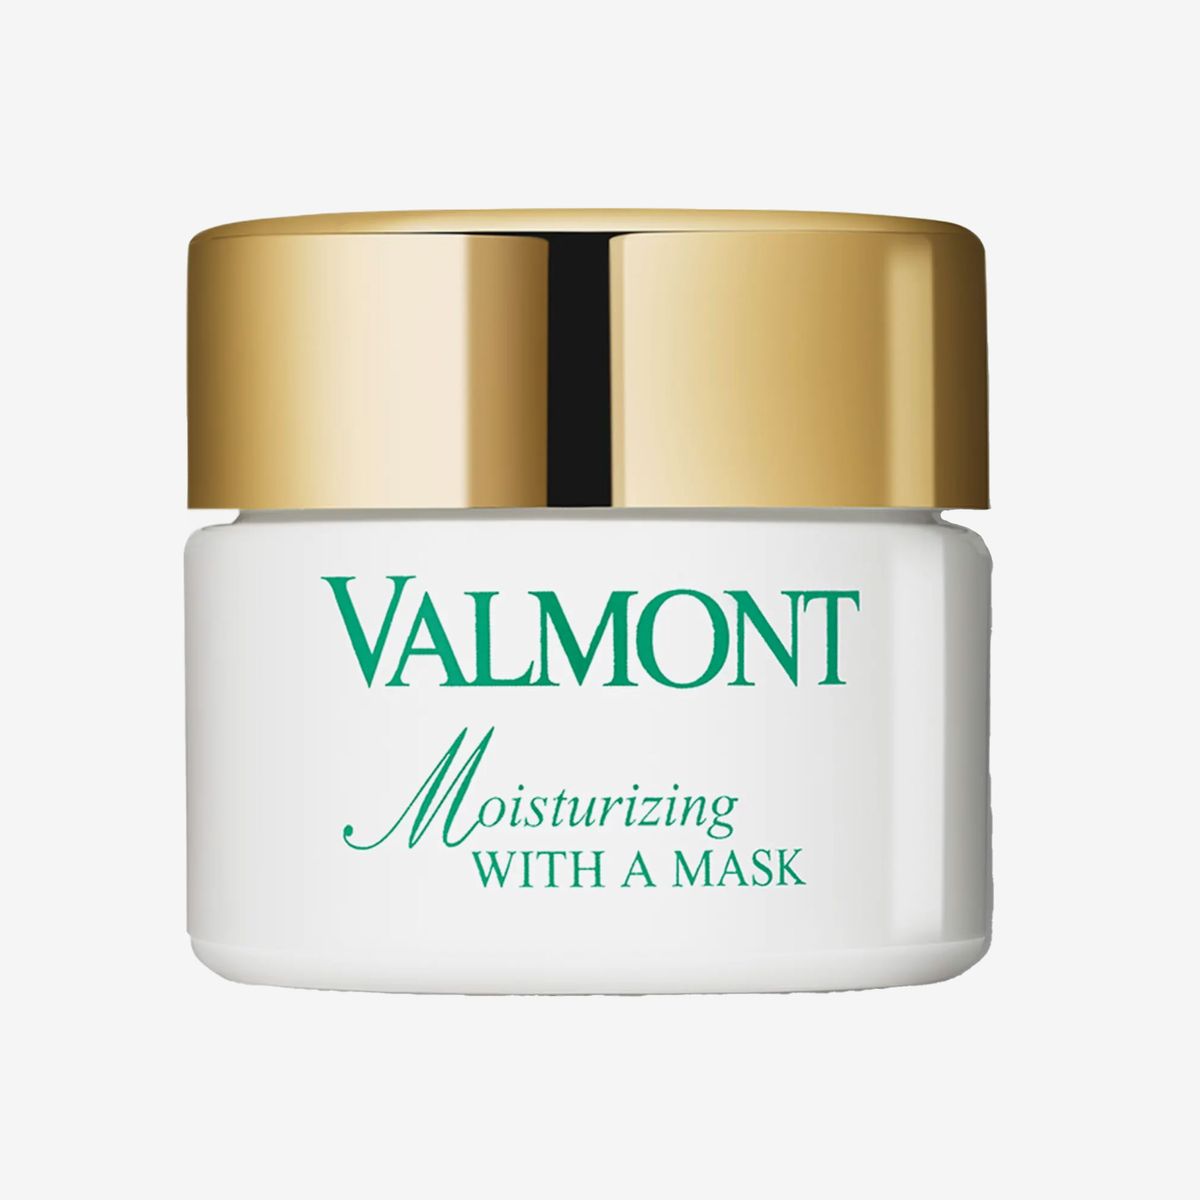 Valmont Moisturizing With A Mask